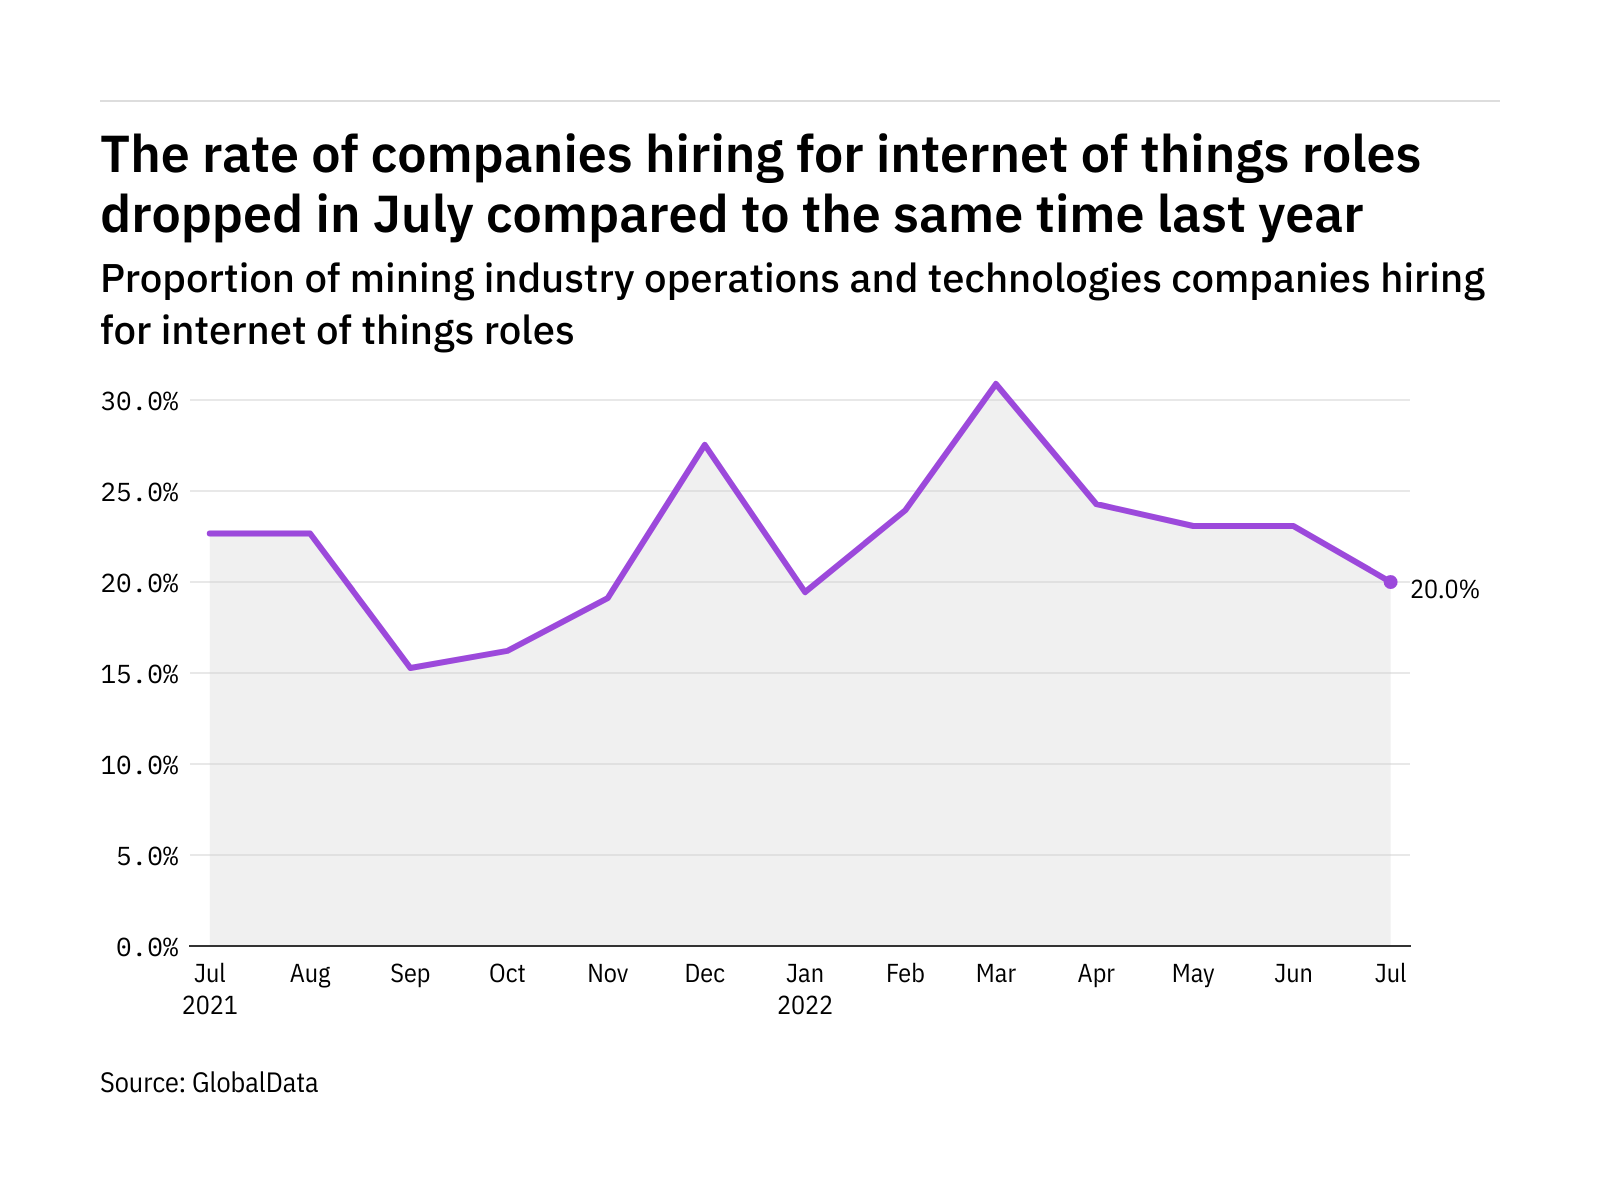 Internet of things hiring levels in the mining industry dropped in July 2022